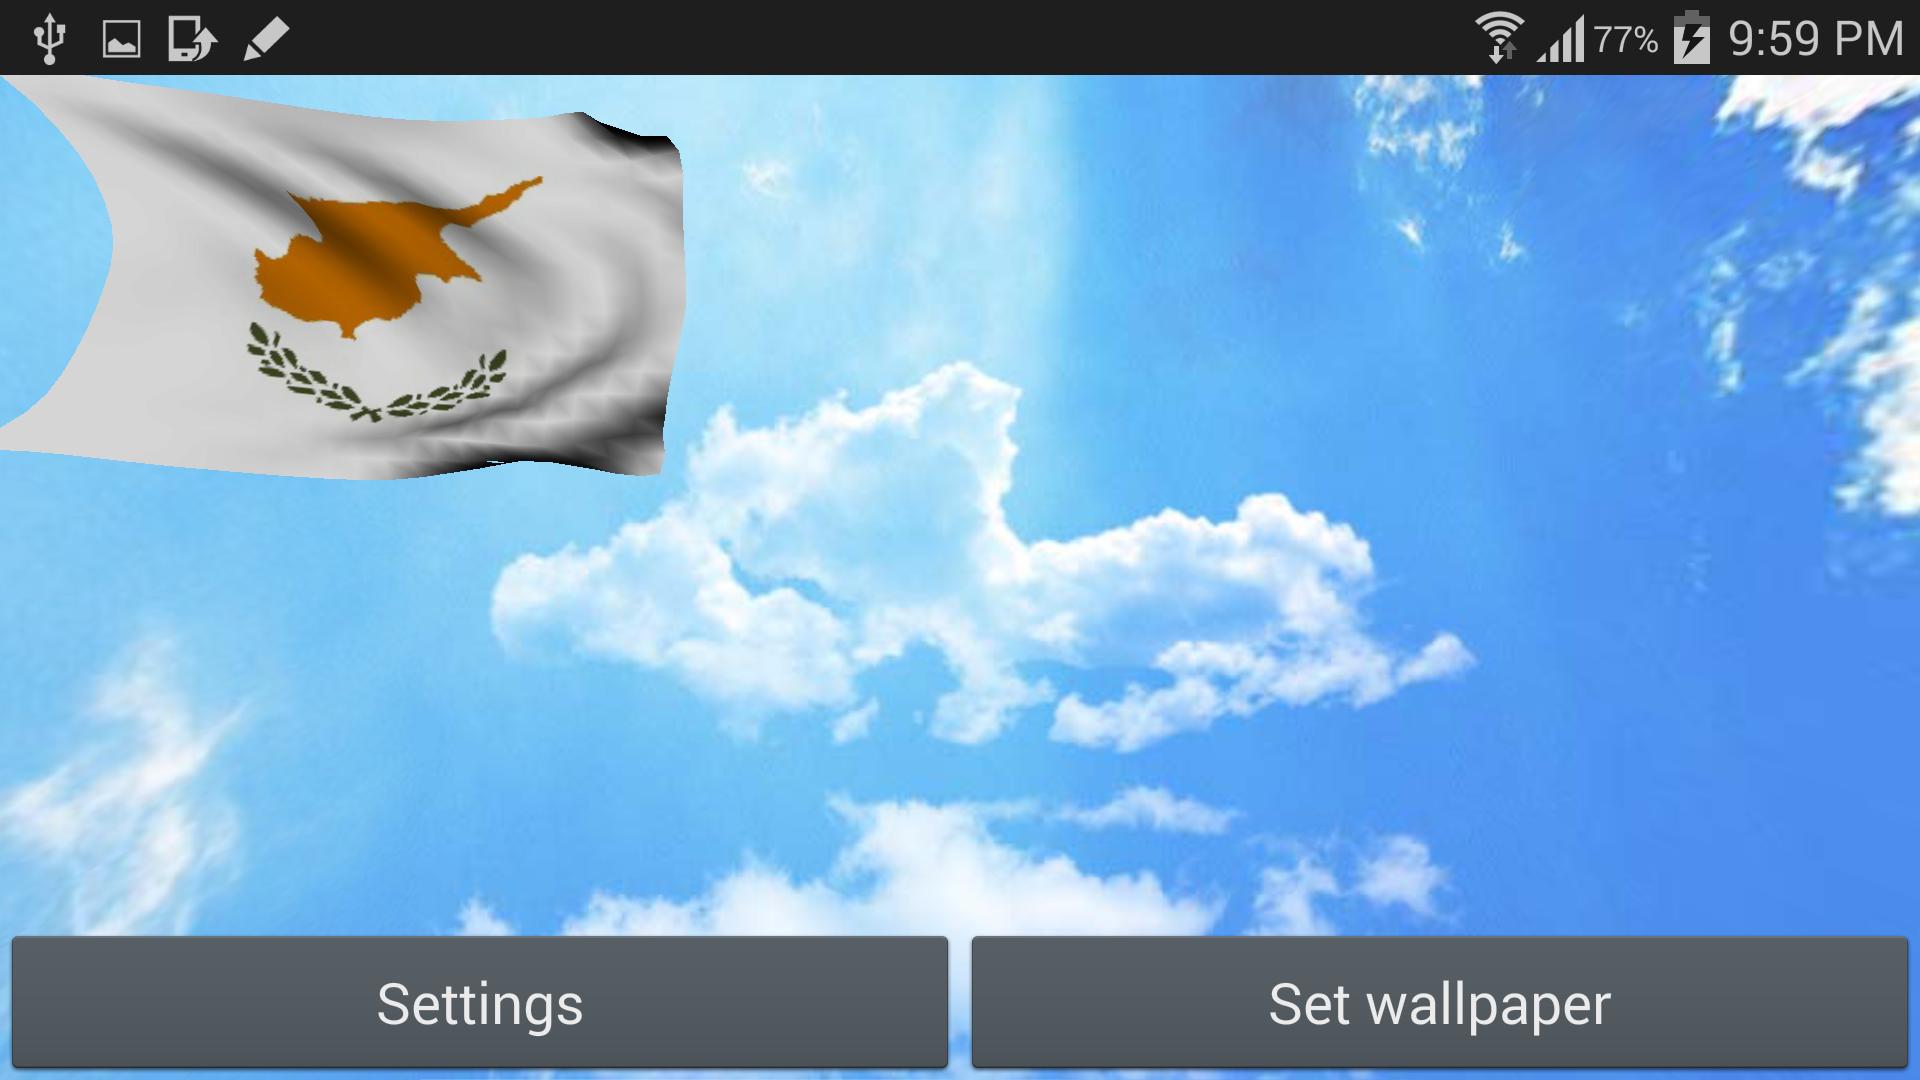 Cyprus Flag Live Wallpaper For Android Apk